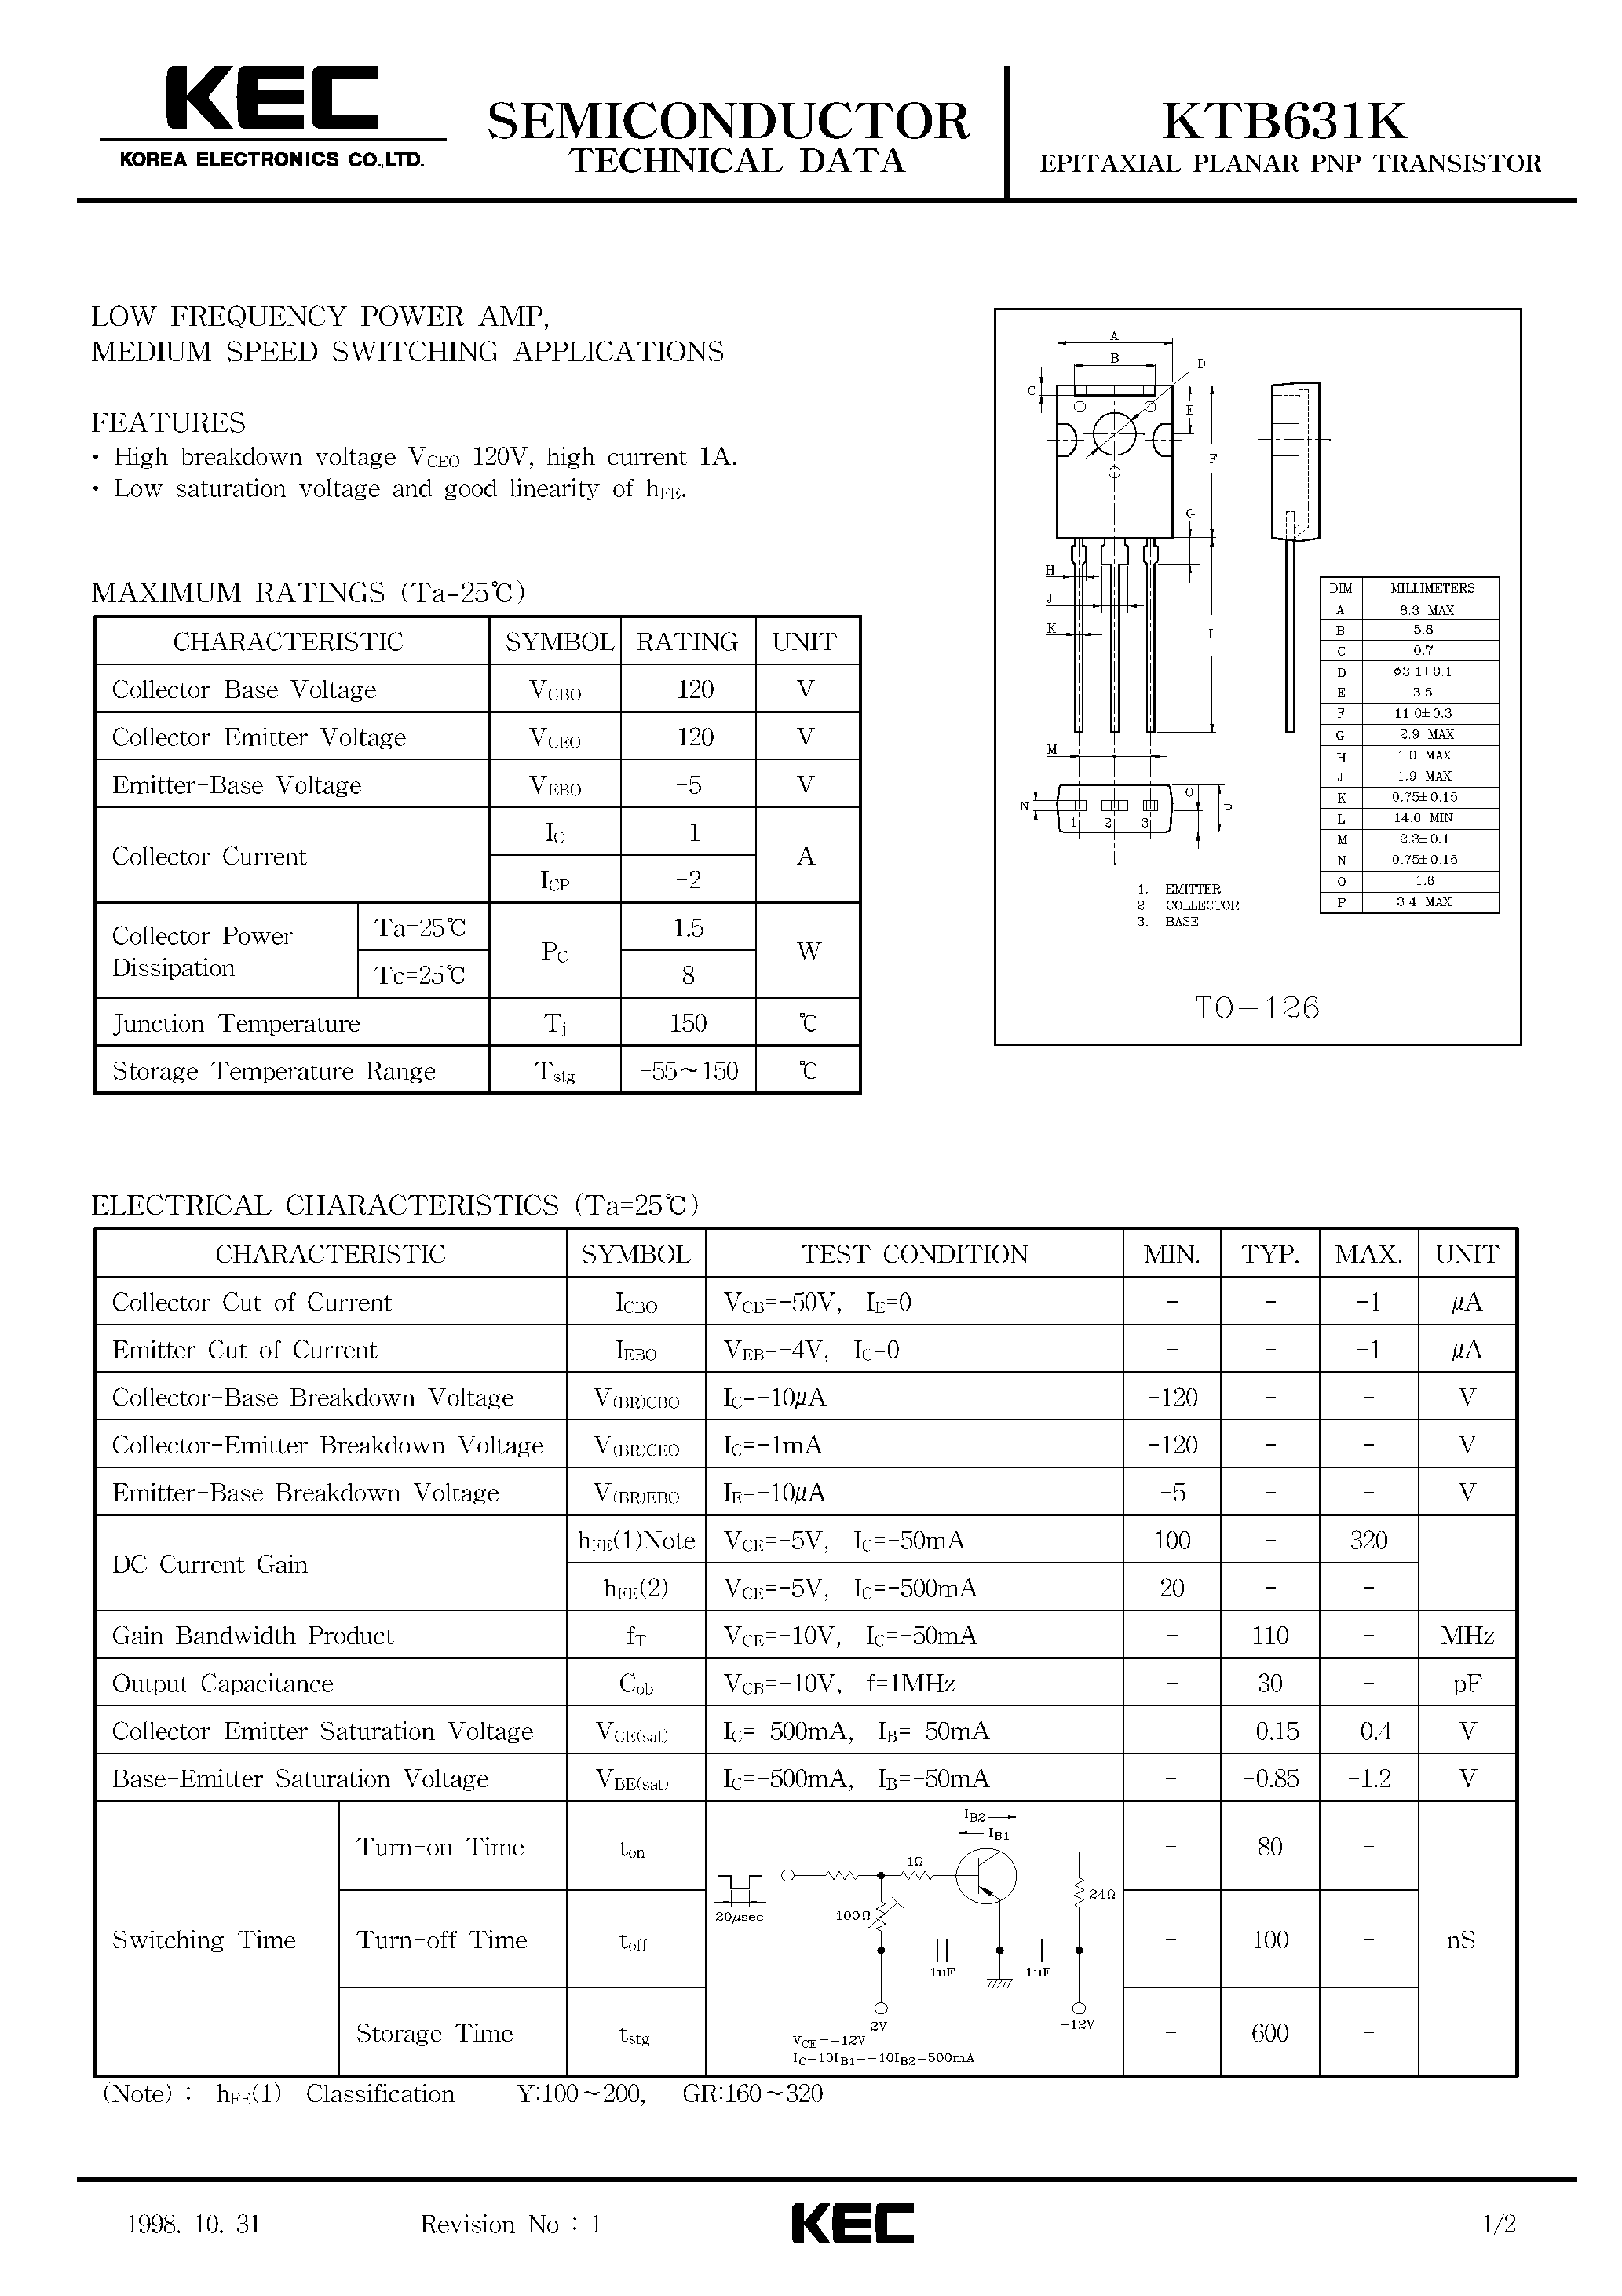 Даташит KTB631 - EPITAXIAL PLANAR PNP TRANSISTOR (LOW FREQUENCY POWER AMP/ MEDIUM SPEED SWITCHING) страница 1